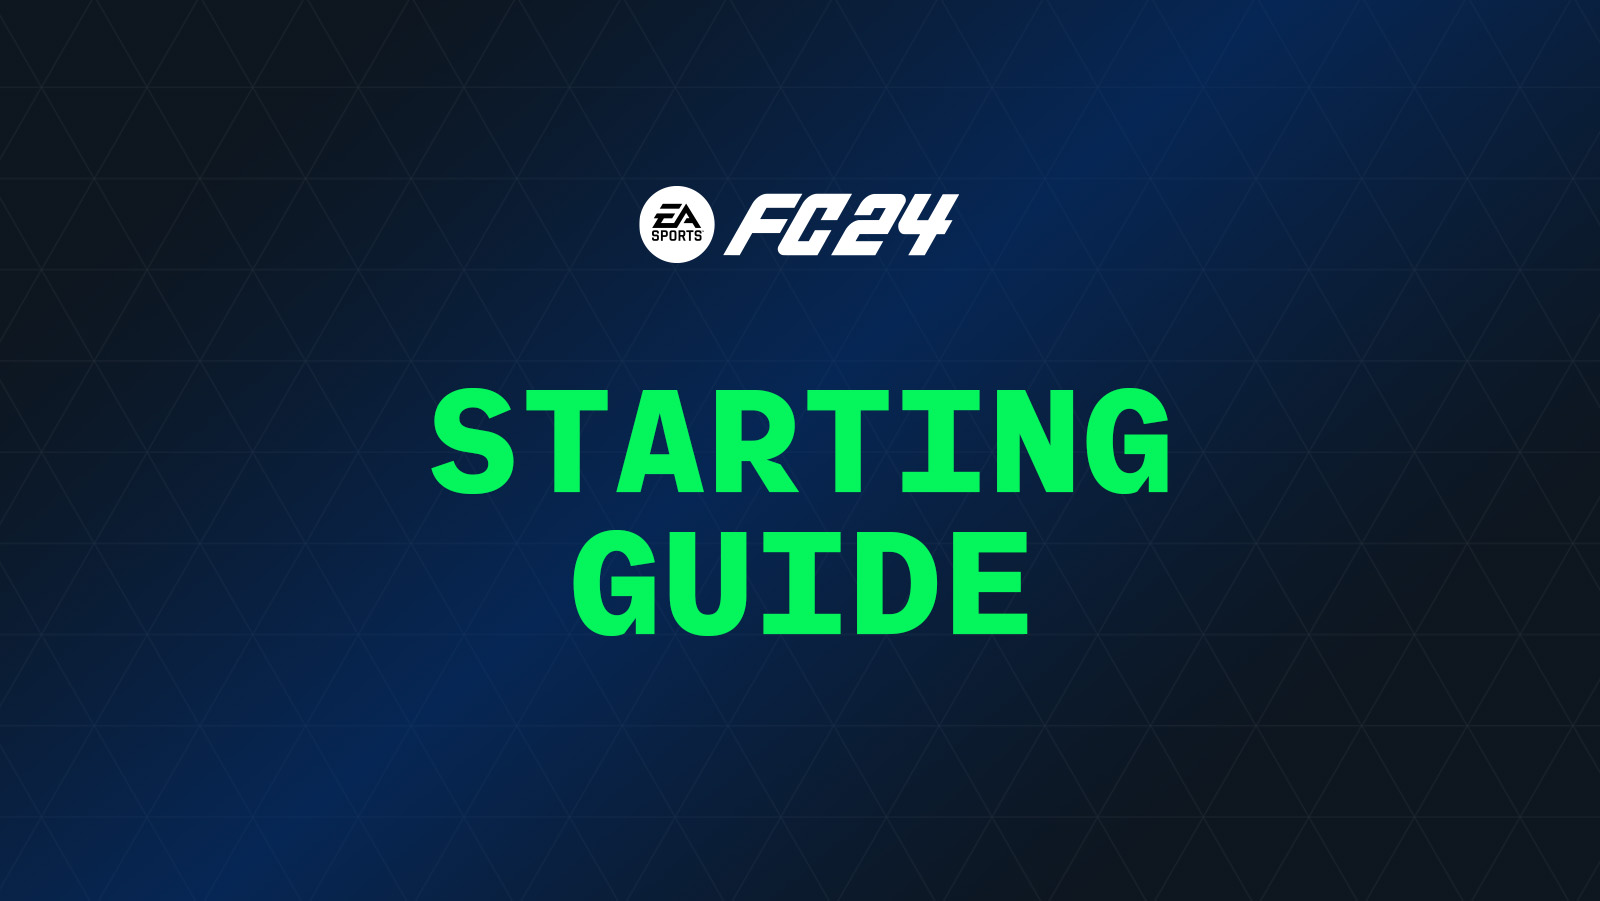 FC 24 – How to Get Started